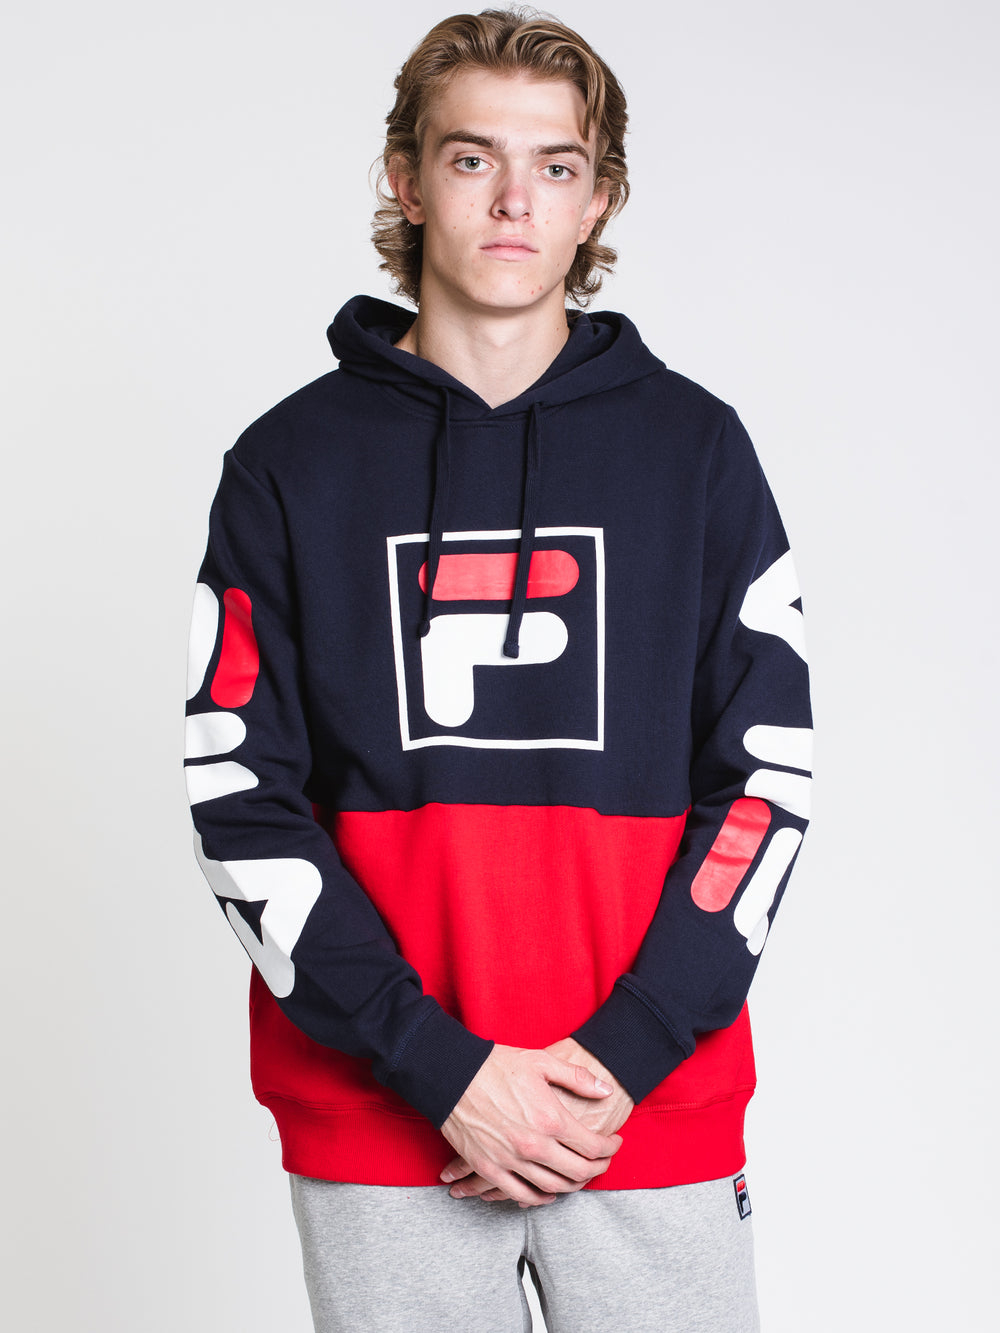 MENS MARZIO Pullover HOOD - NAVY/RED - CLEARANCE